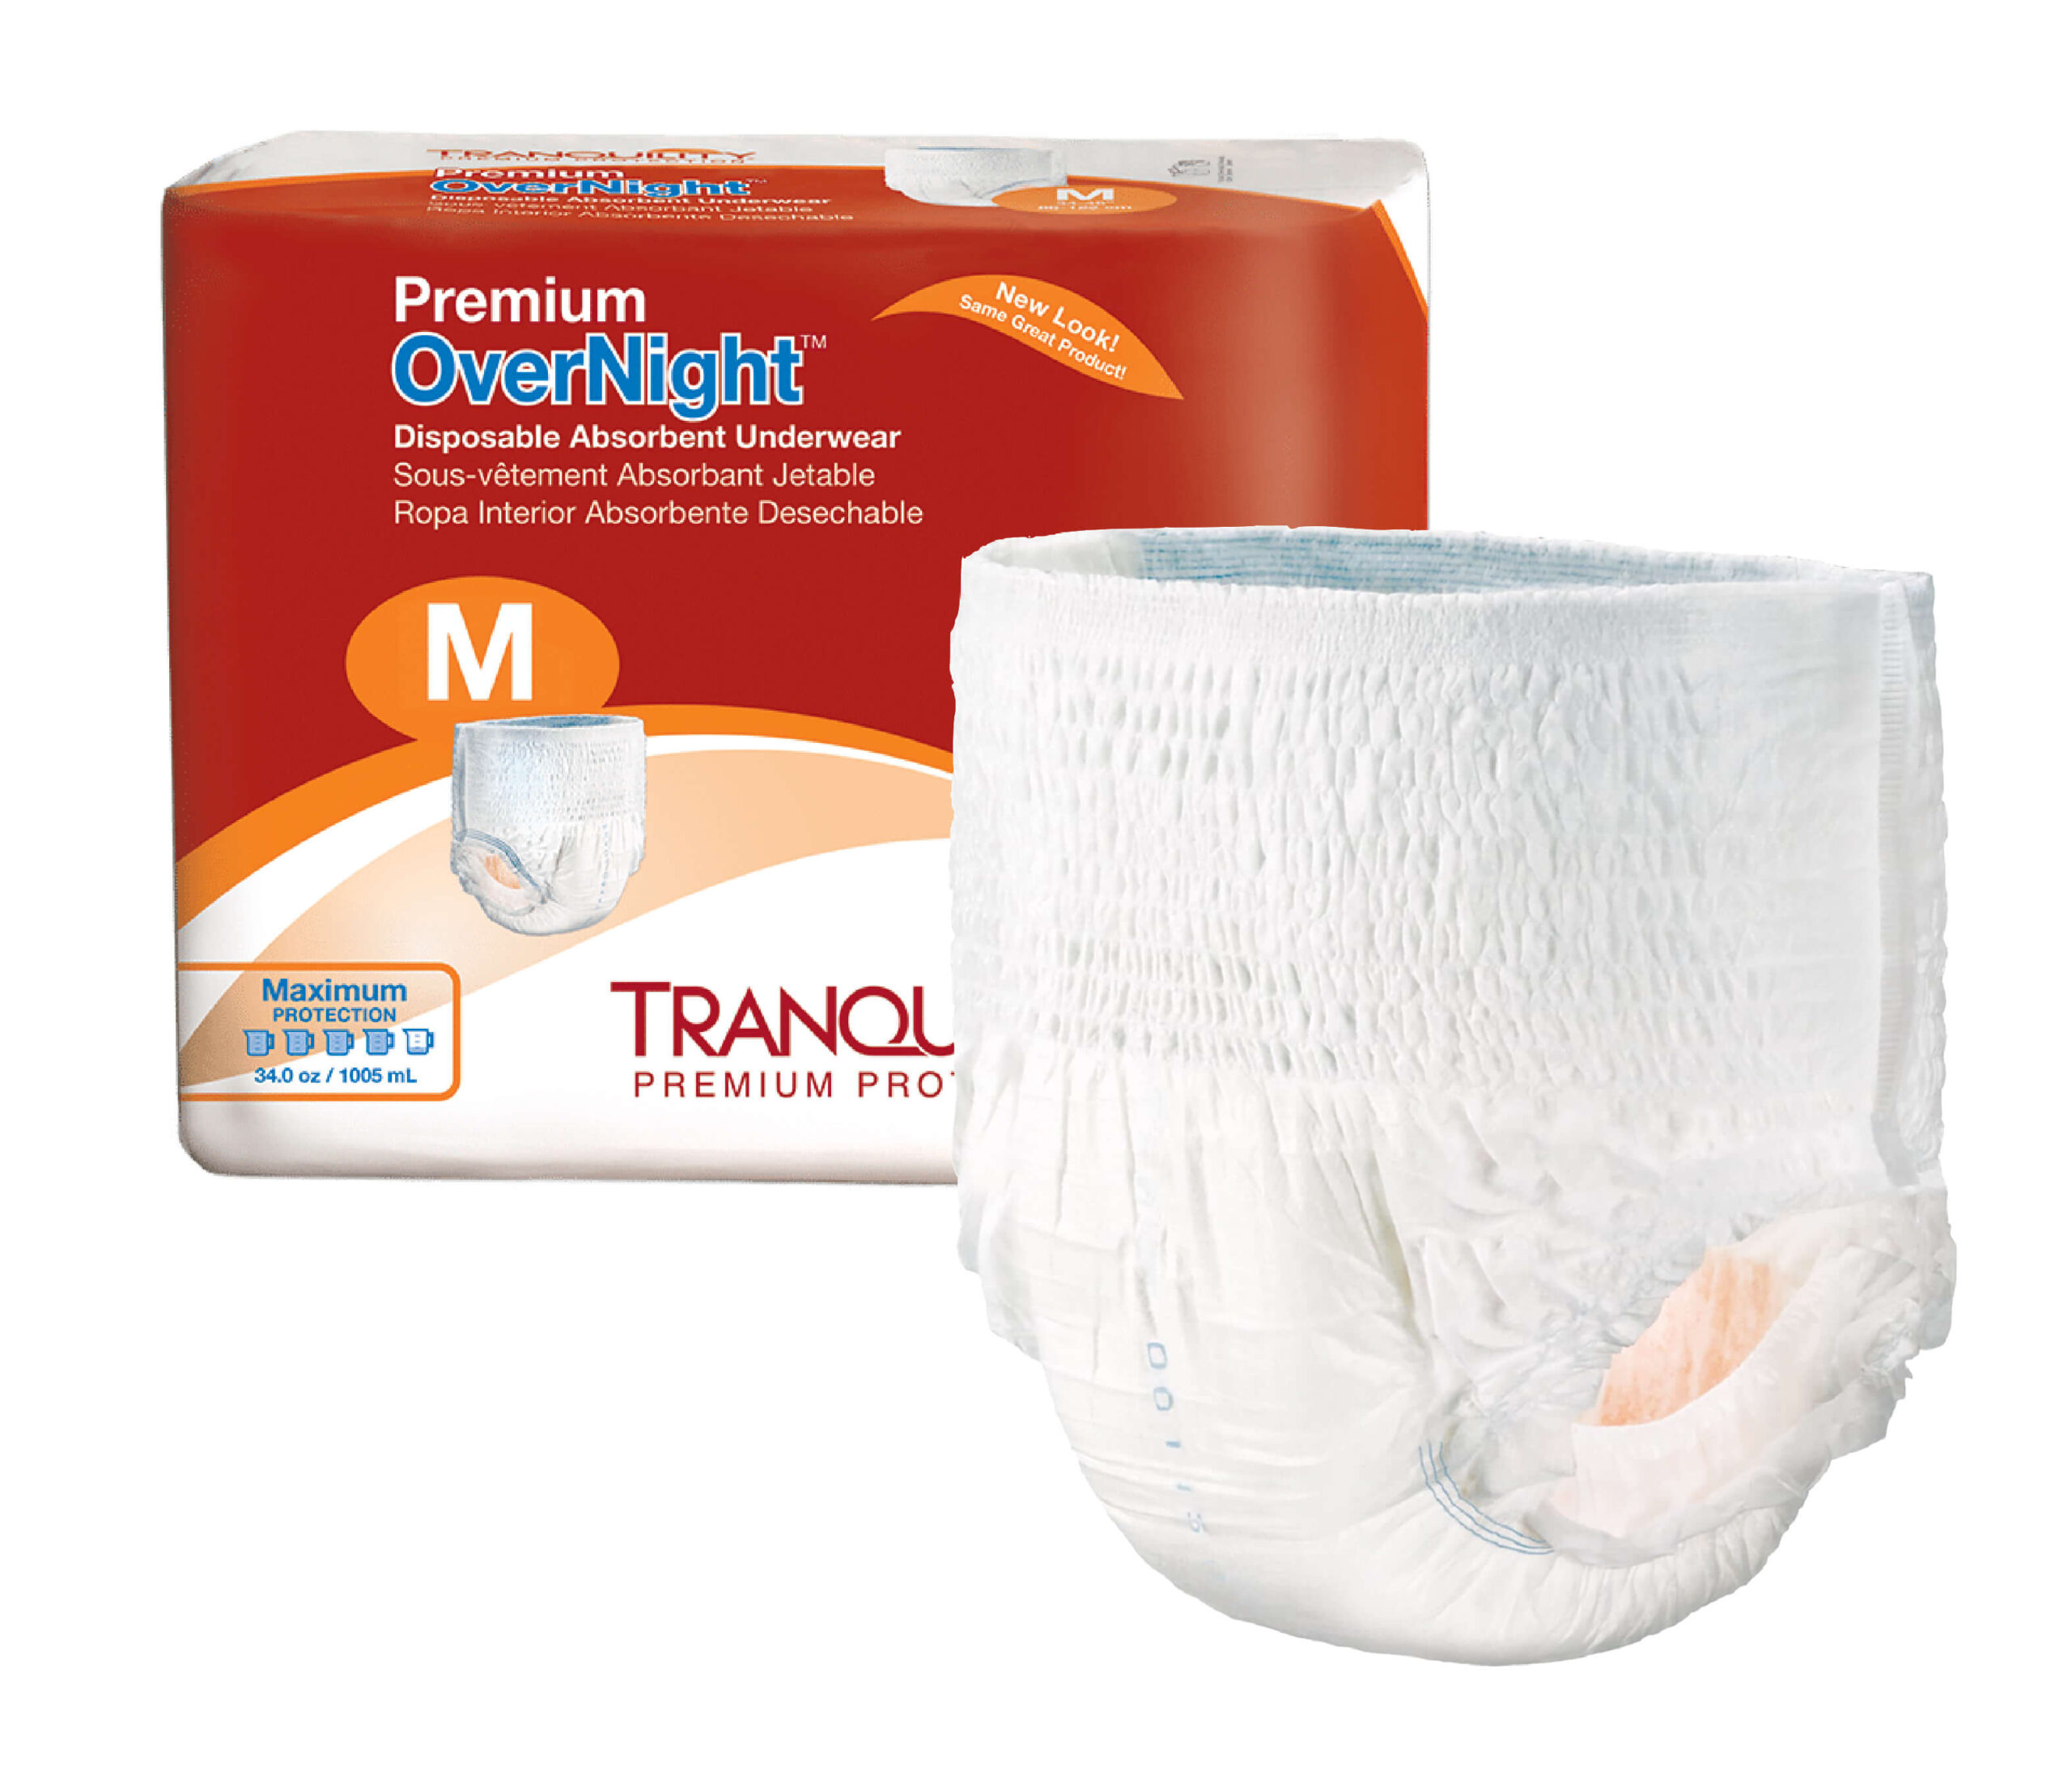 6 Excellent Travel Diapers for Adults - Tranquility Products